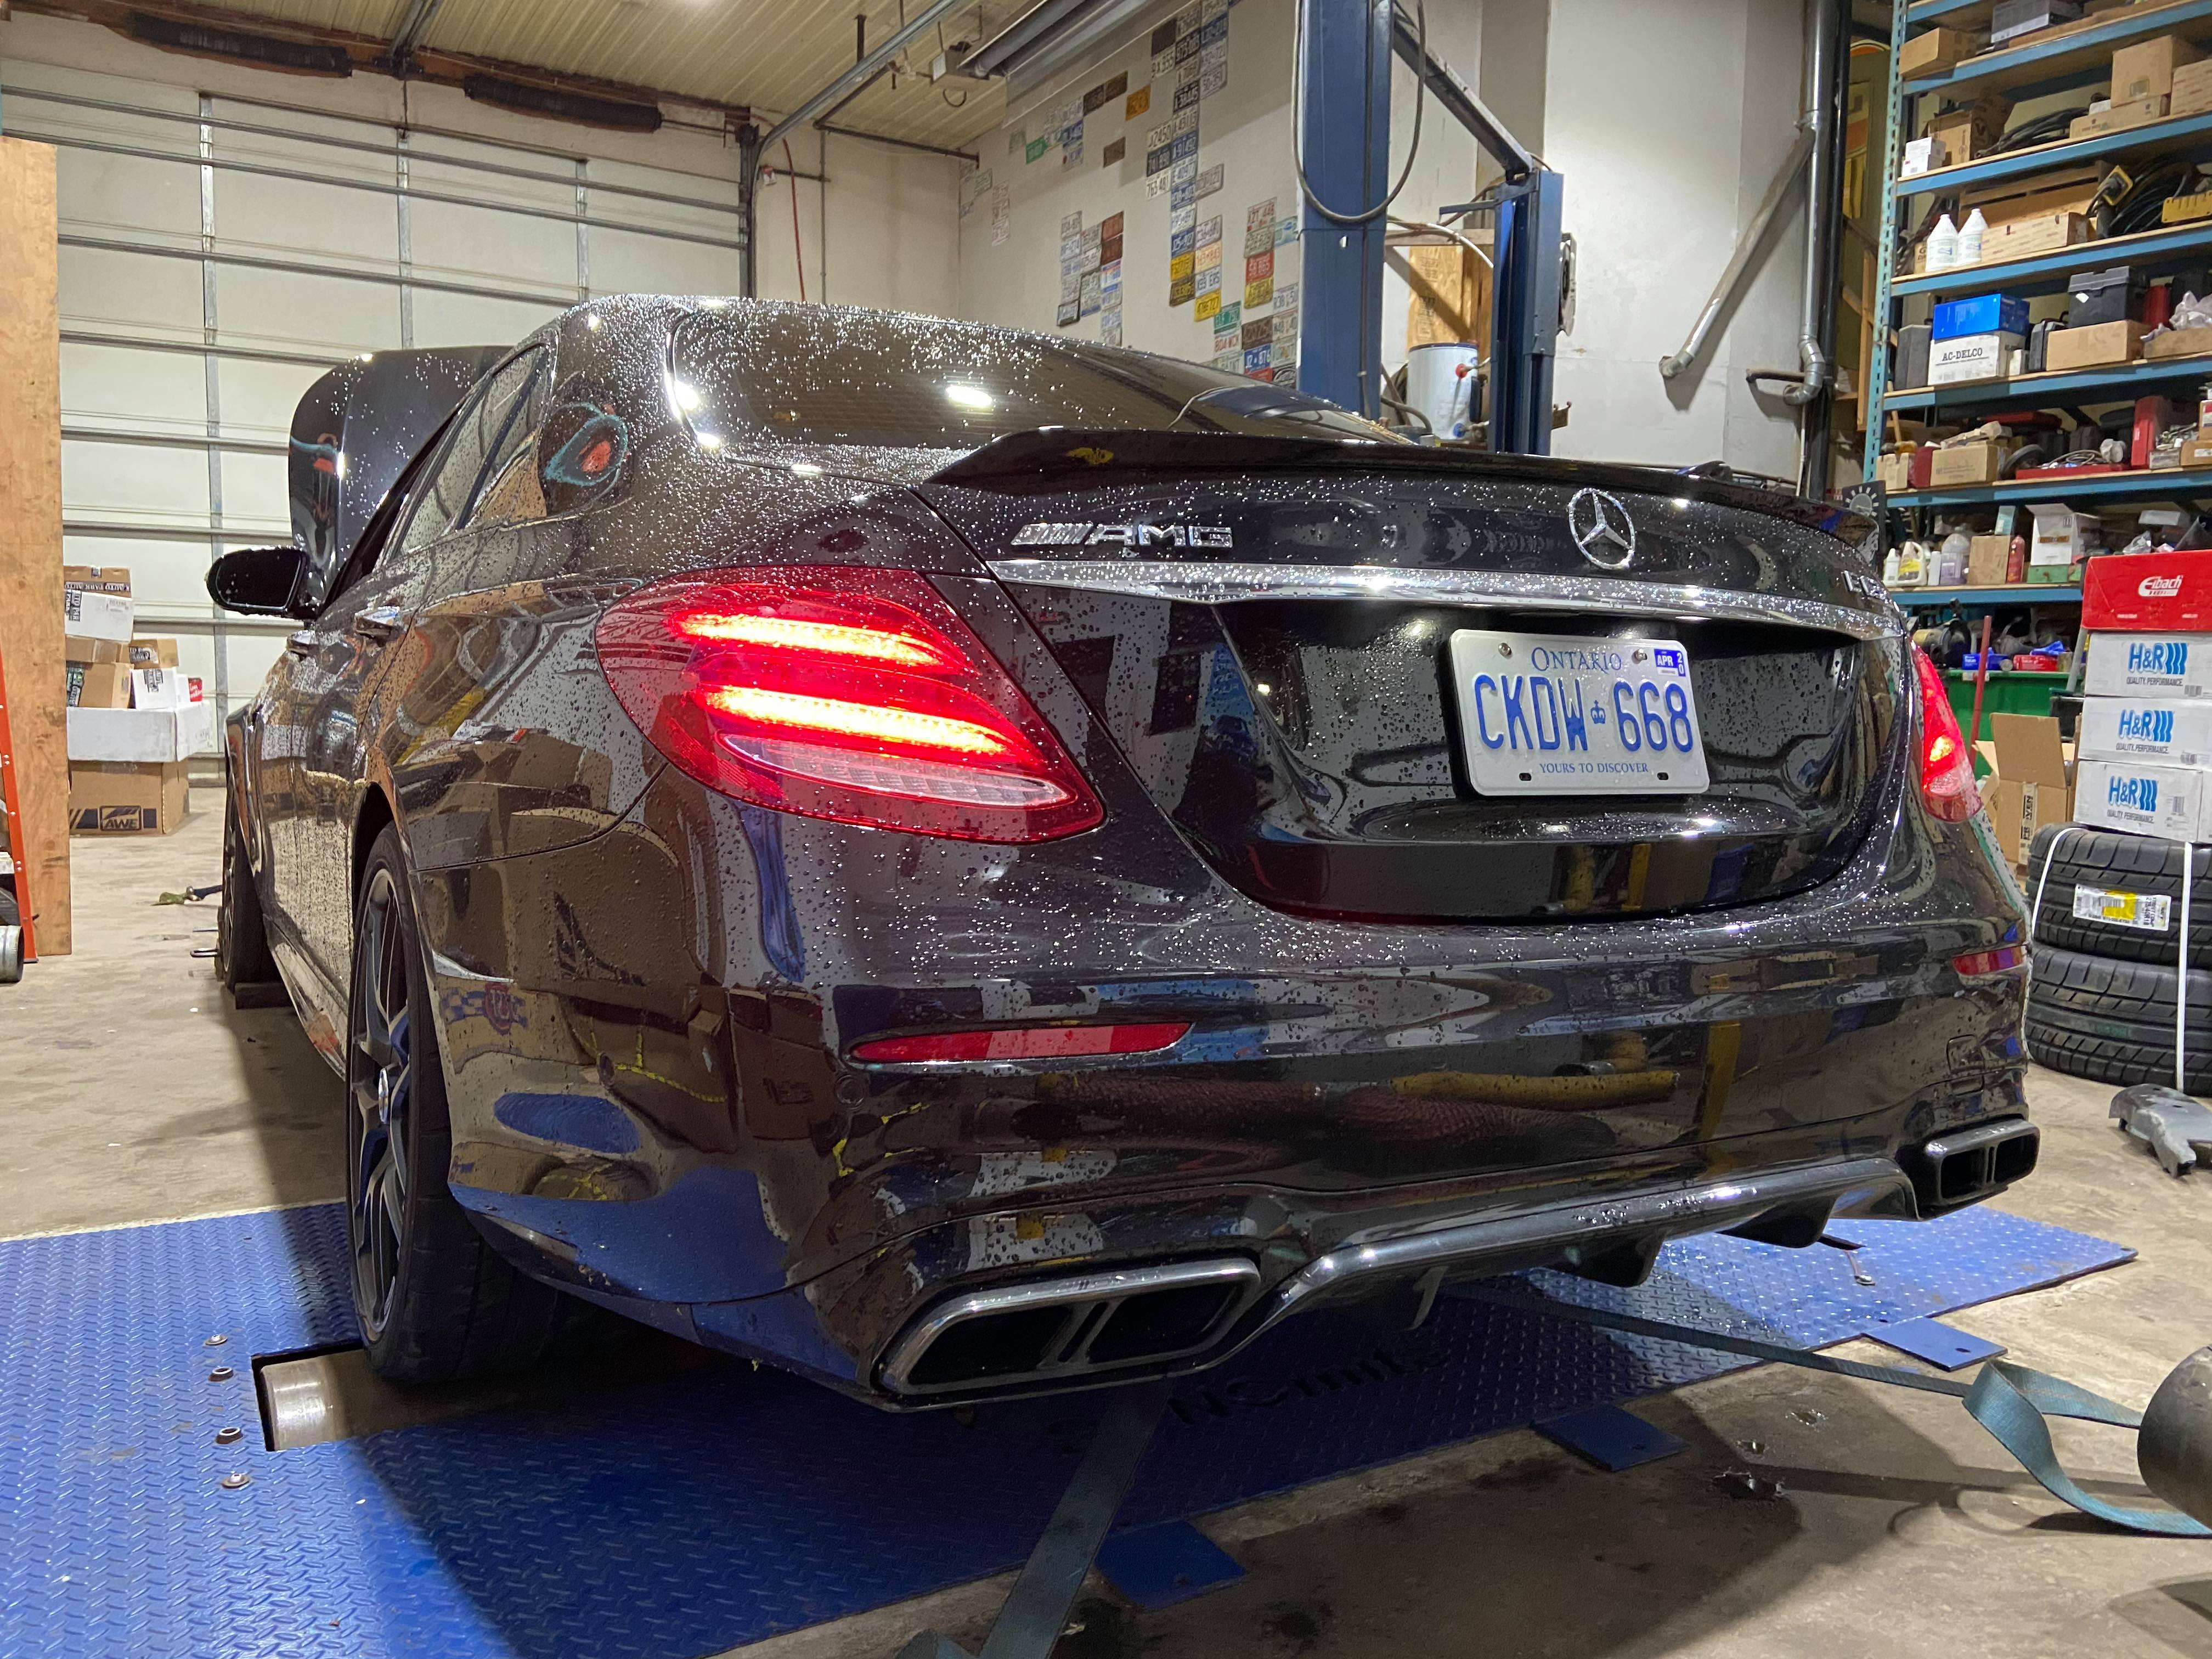 2018 E63 S STAGE 1 OVER 600WHP!